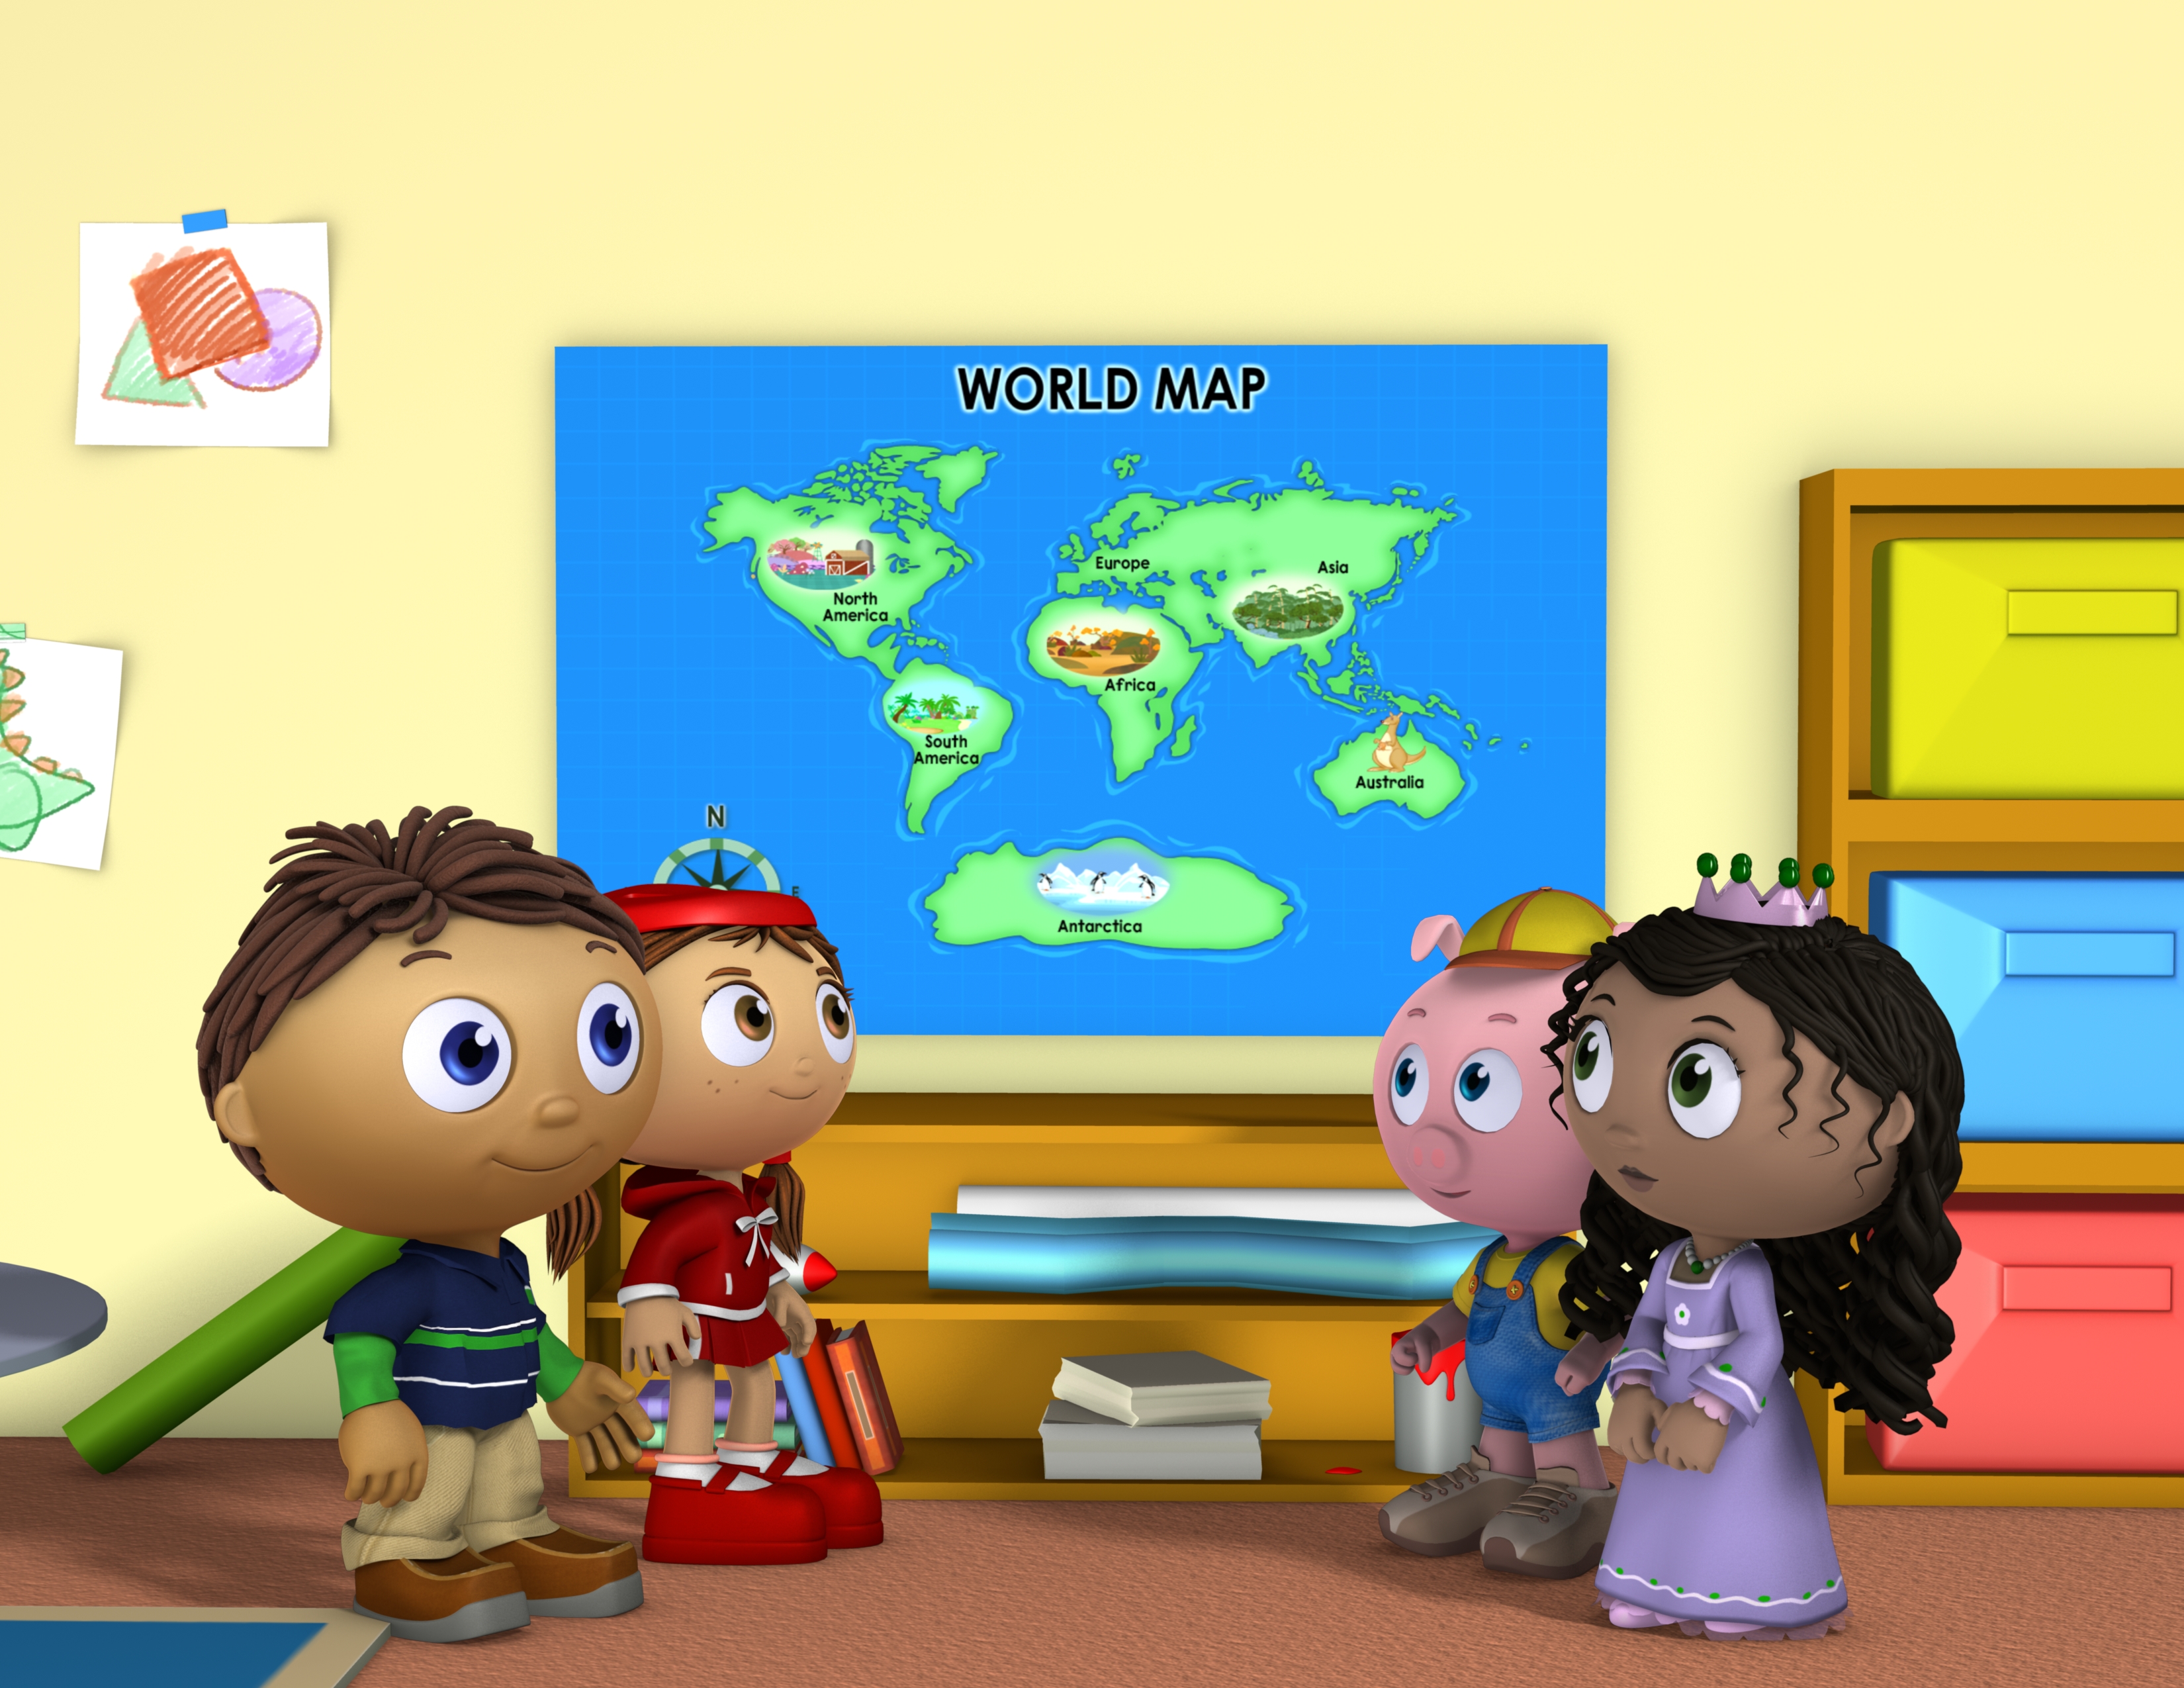 Press Release: PBS KIDS Kicks Off Summer Learning with the SUPER WHY! Around the World Adventure